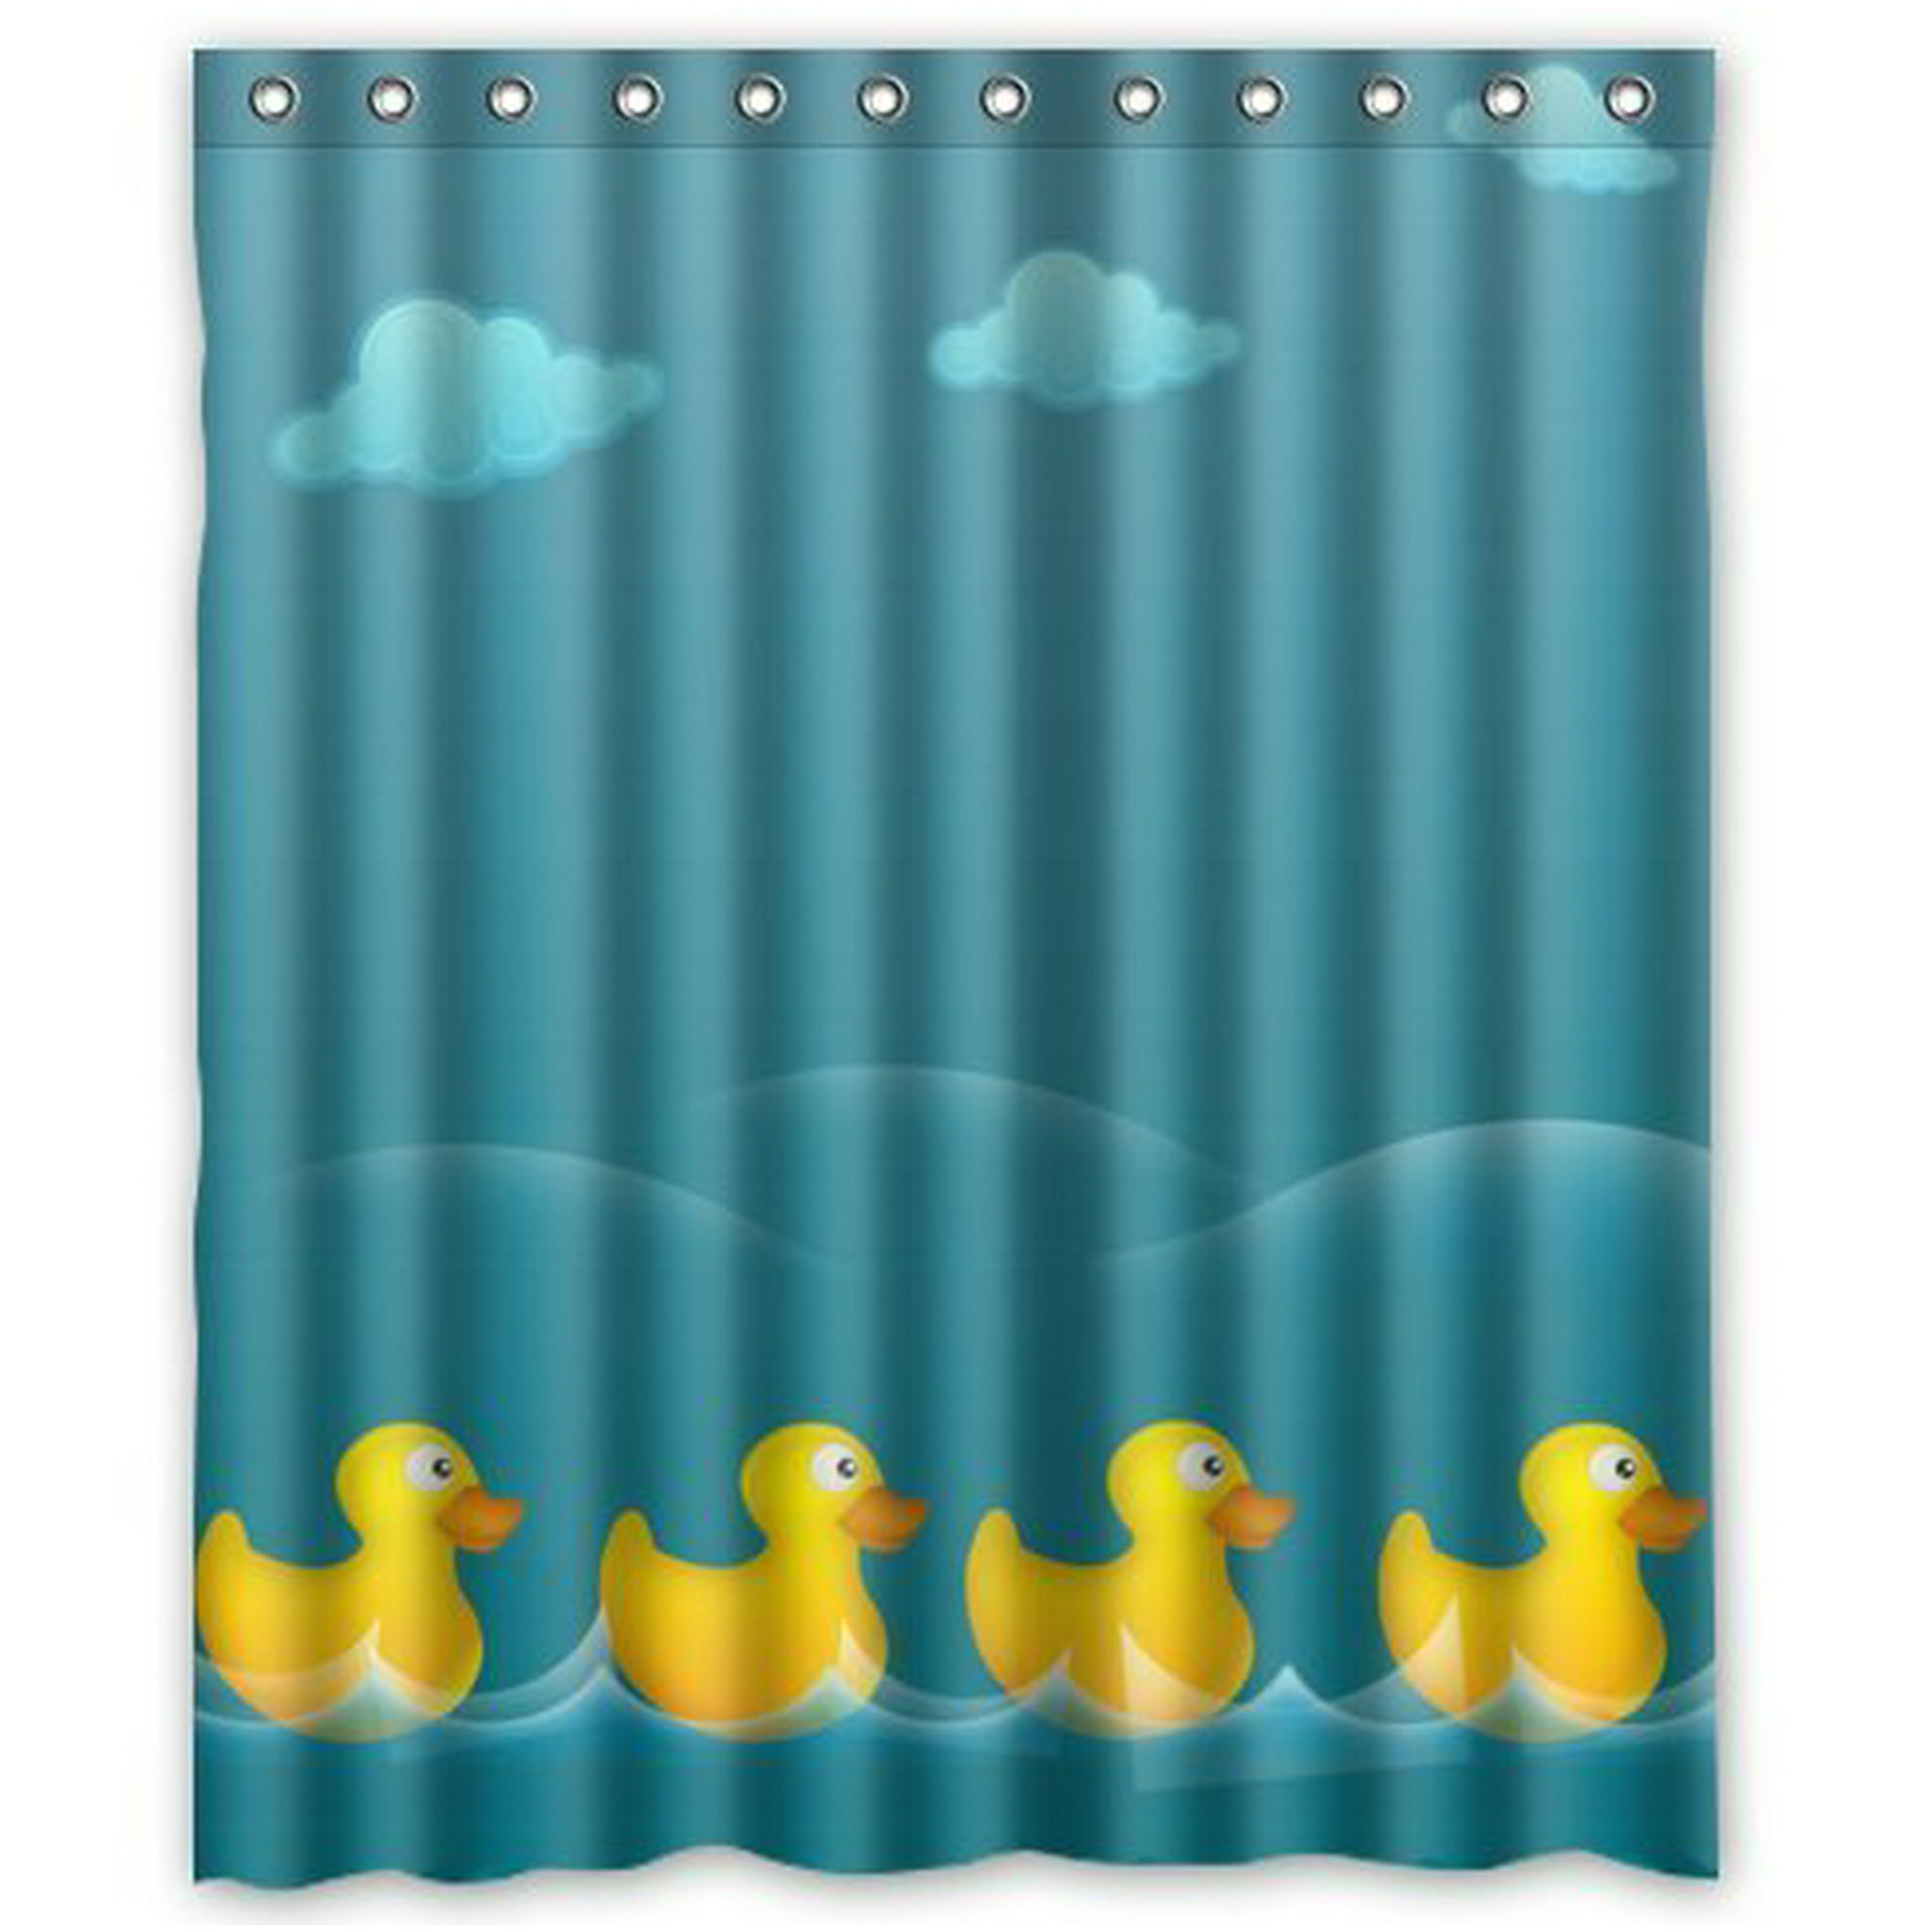 Xddja Funny And Cute Tiled Yellow, Rubber Duck Fabric Shower Curtain